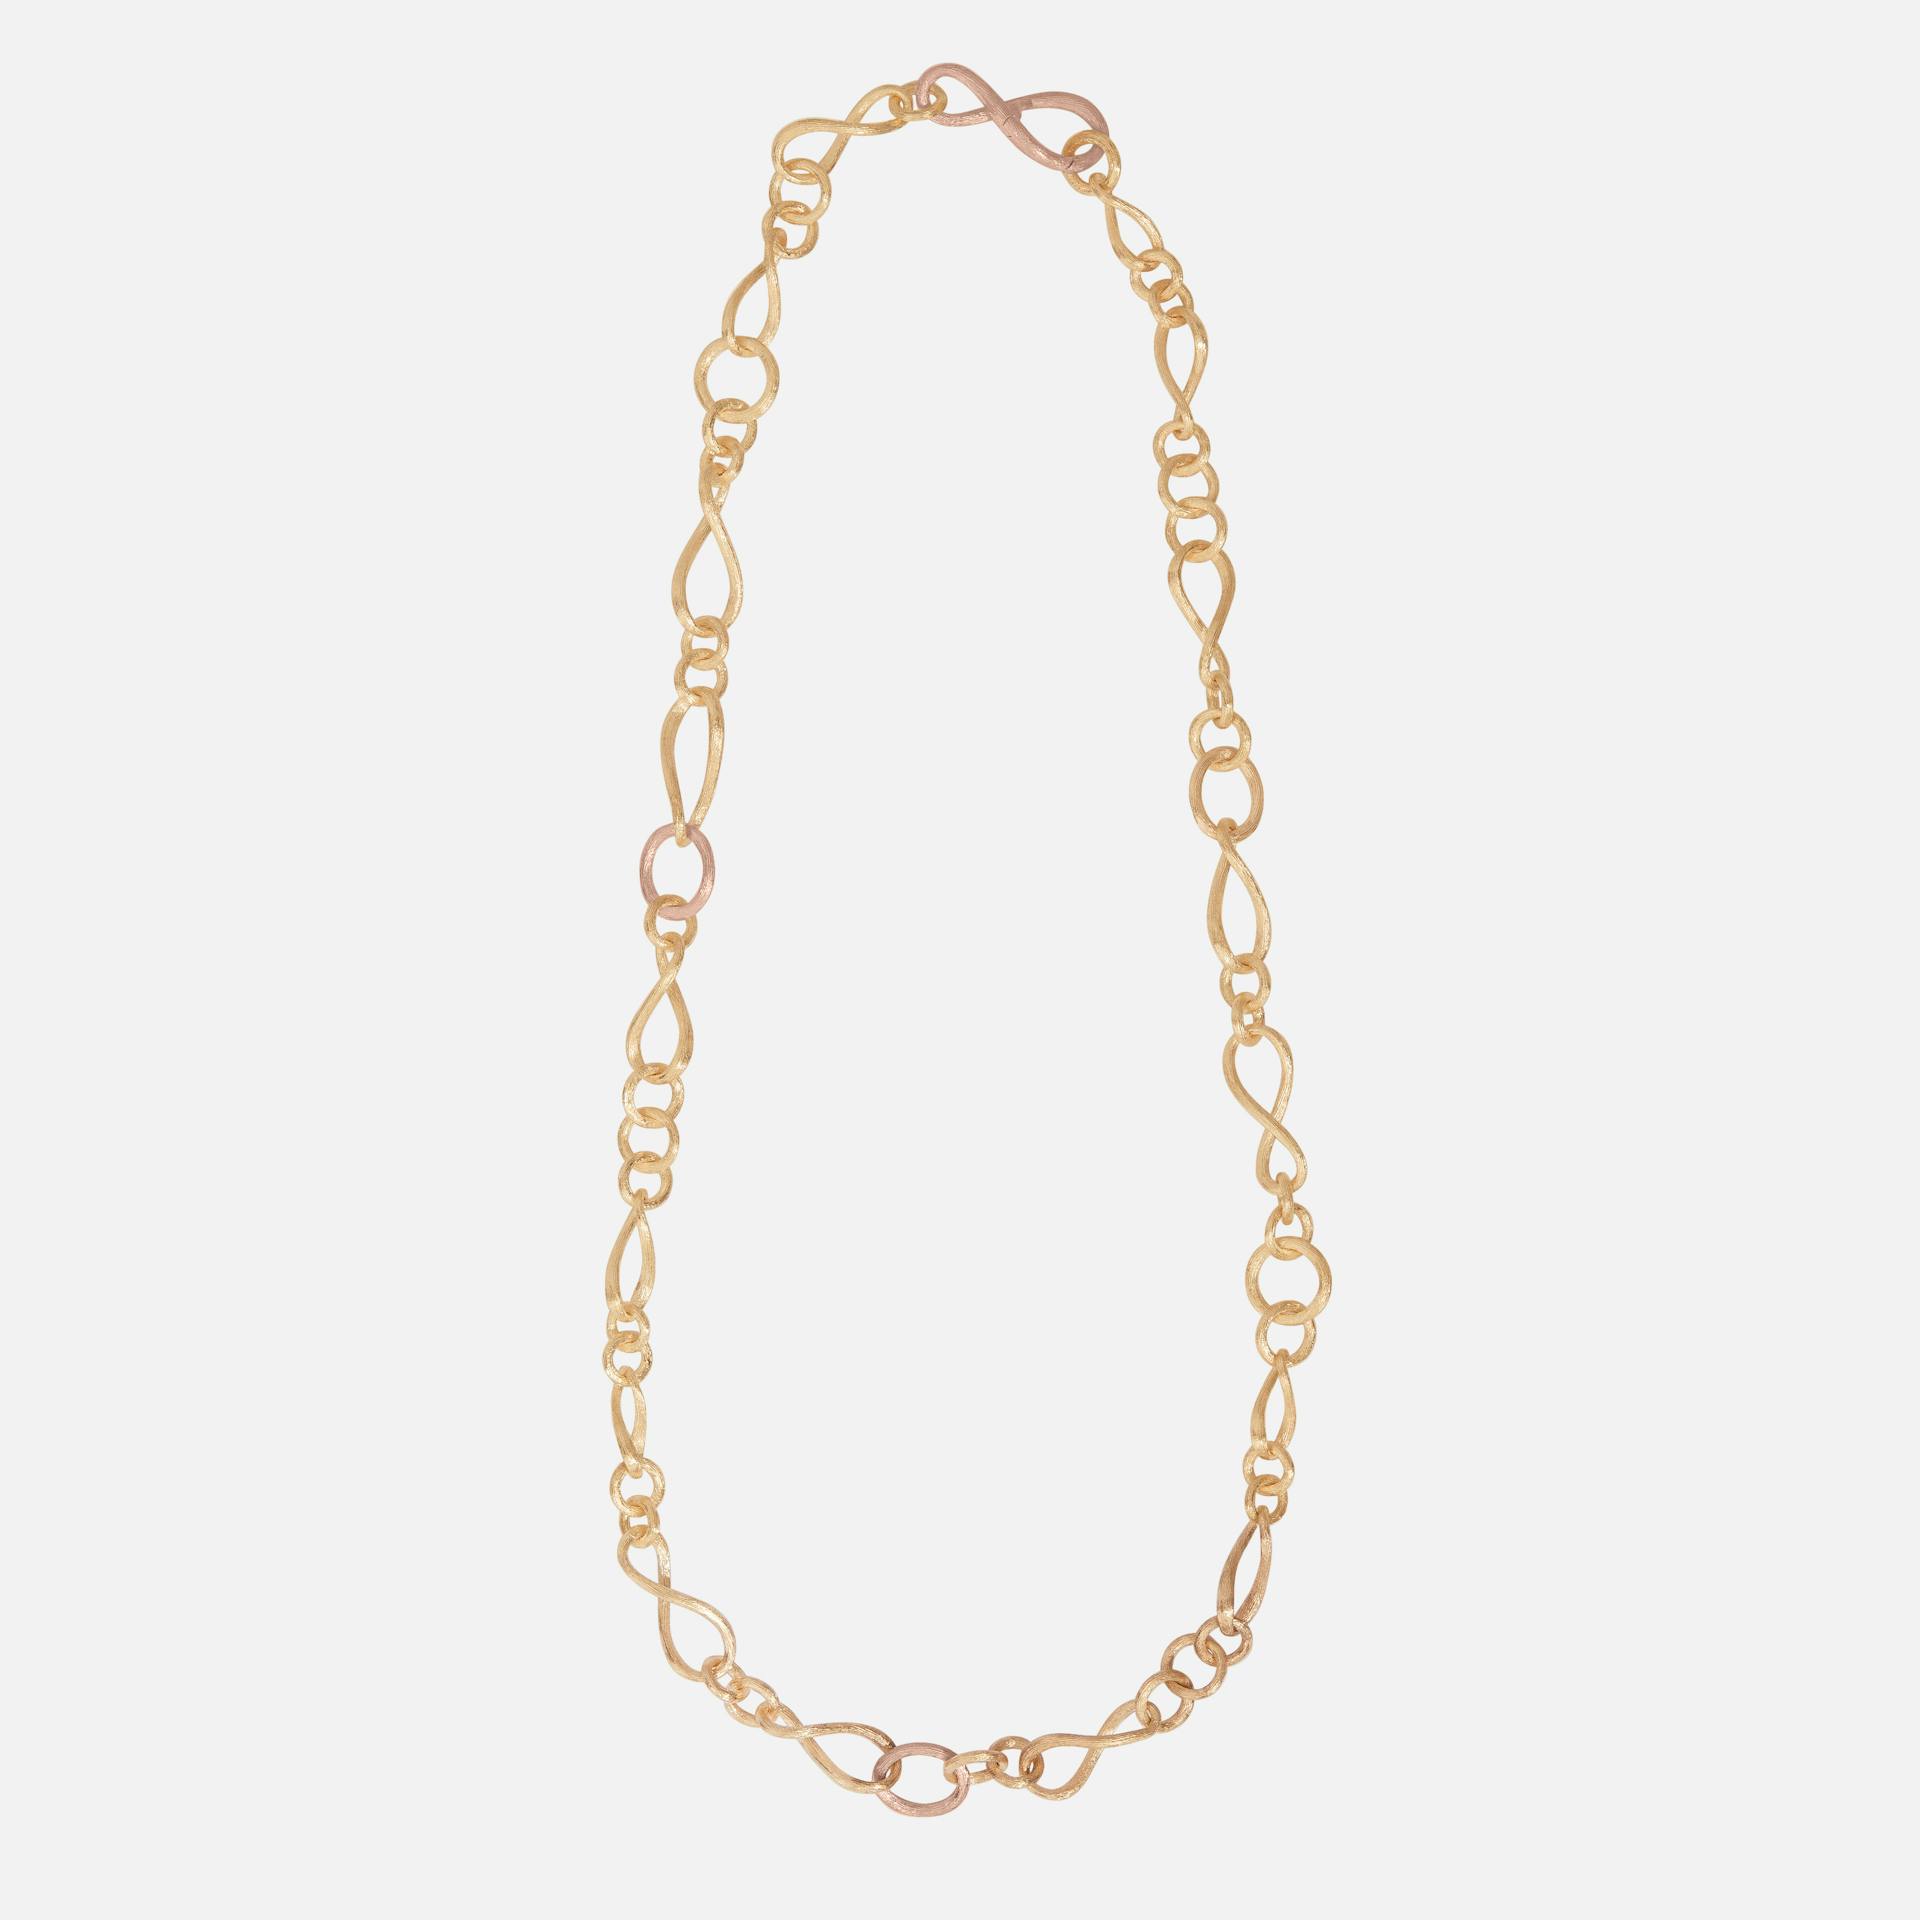 Love collier small Love Collier small YG/RG 54 cm 18k gold and rose gold